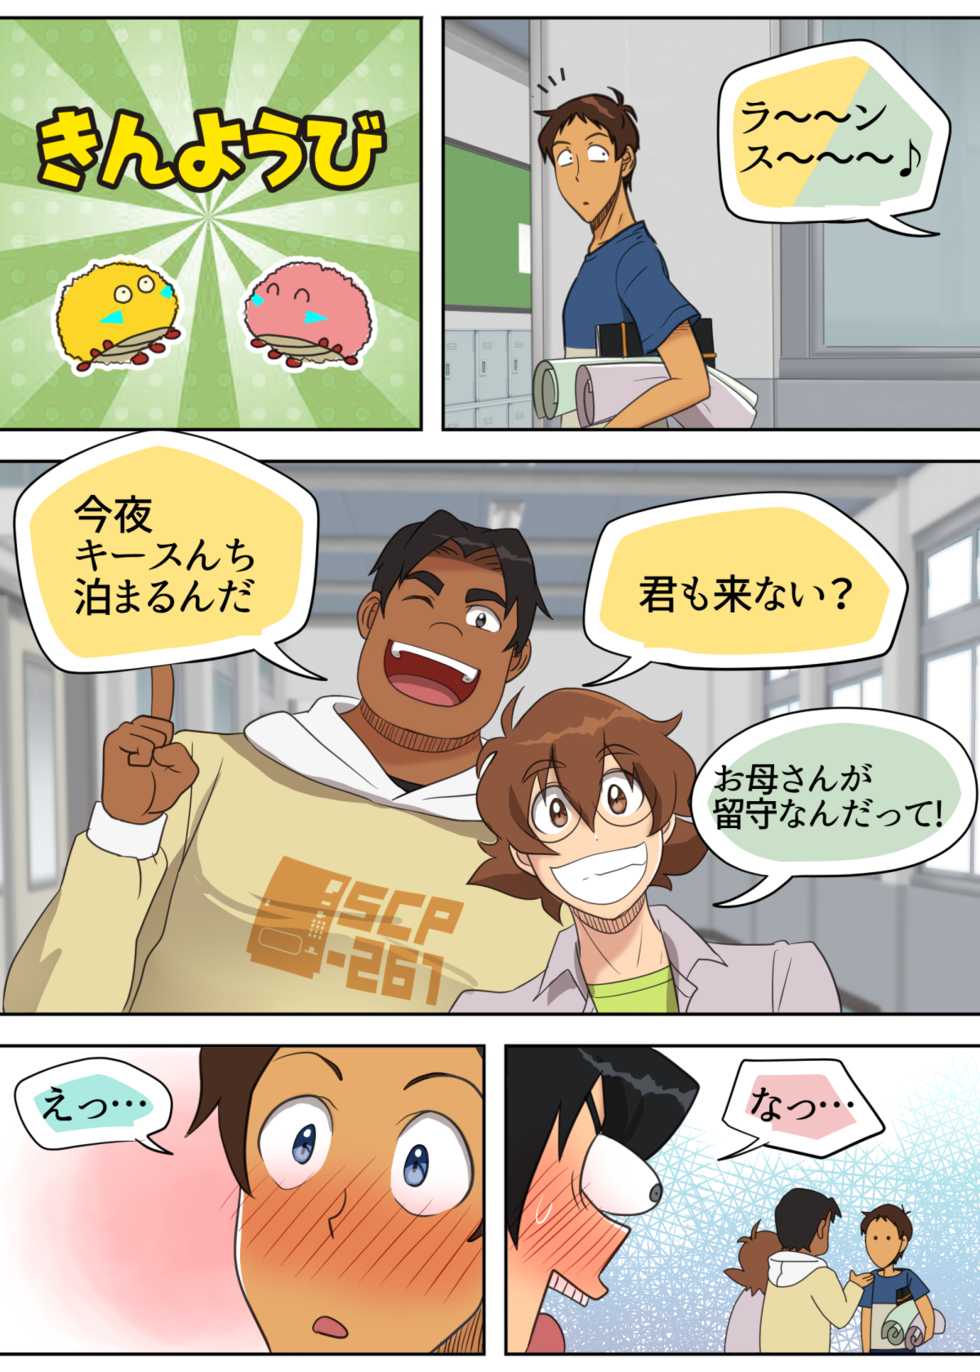 [halleseed] Otomari Party Game (Voltron: Legendary Defender) - Page 8